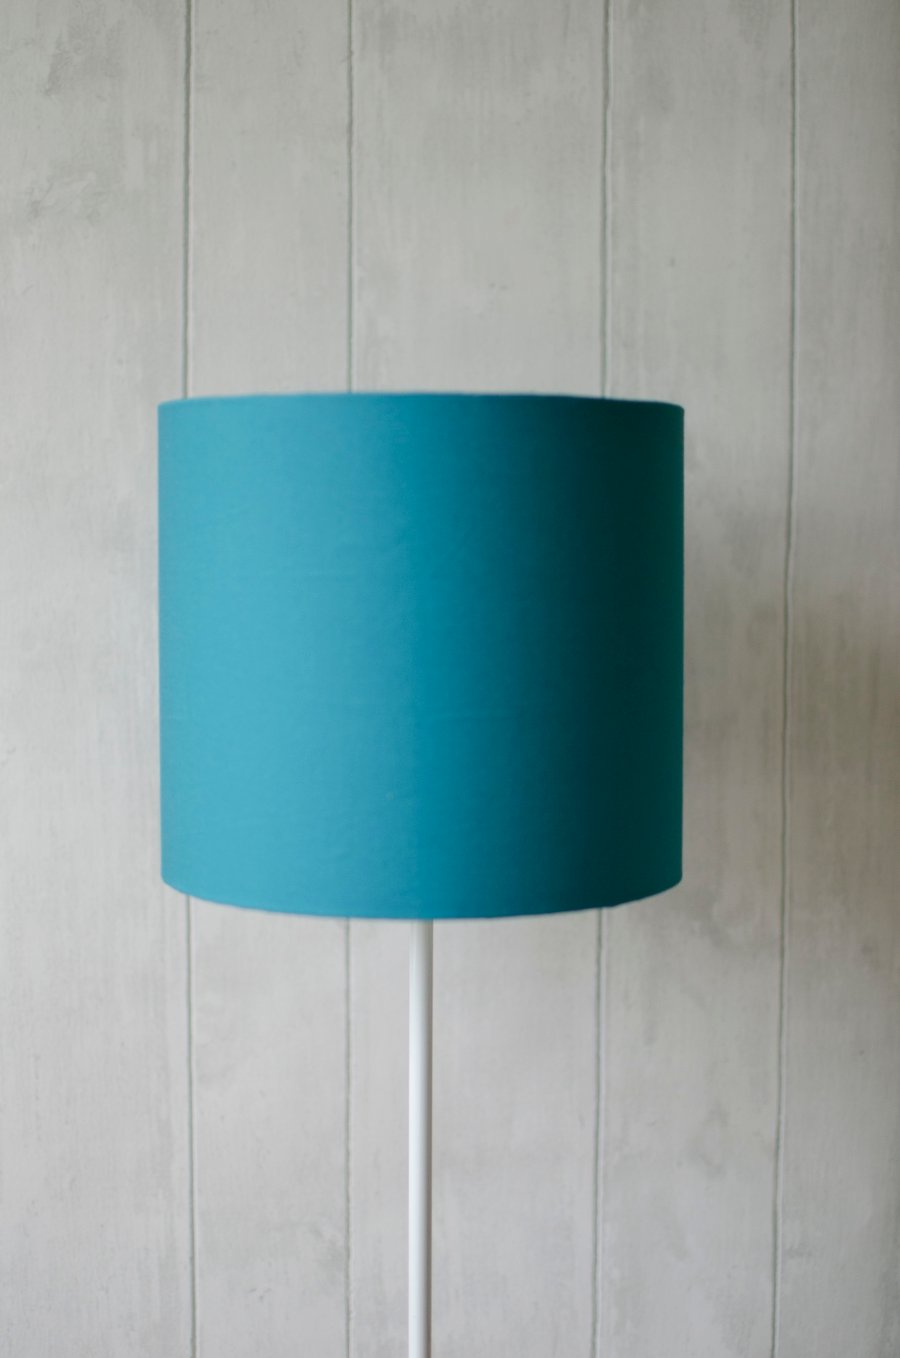 30cm Turquoise Lampshade, Turquoise lamp shade, Teal lampshade, drum lampshade